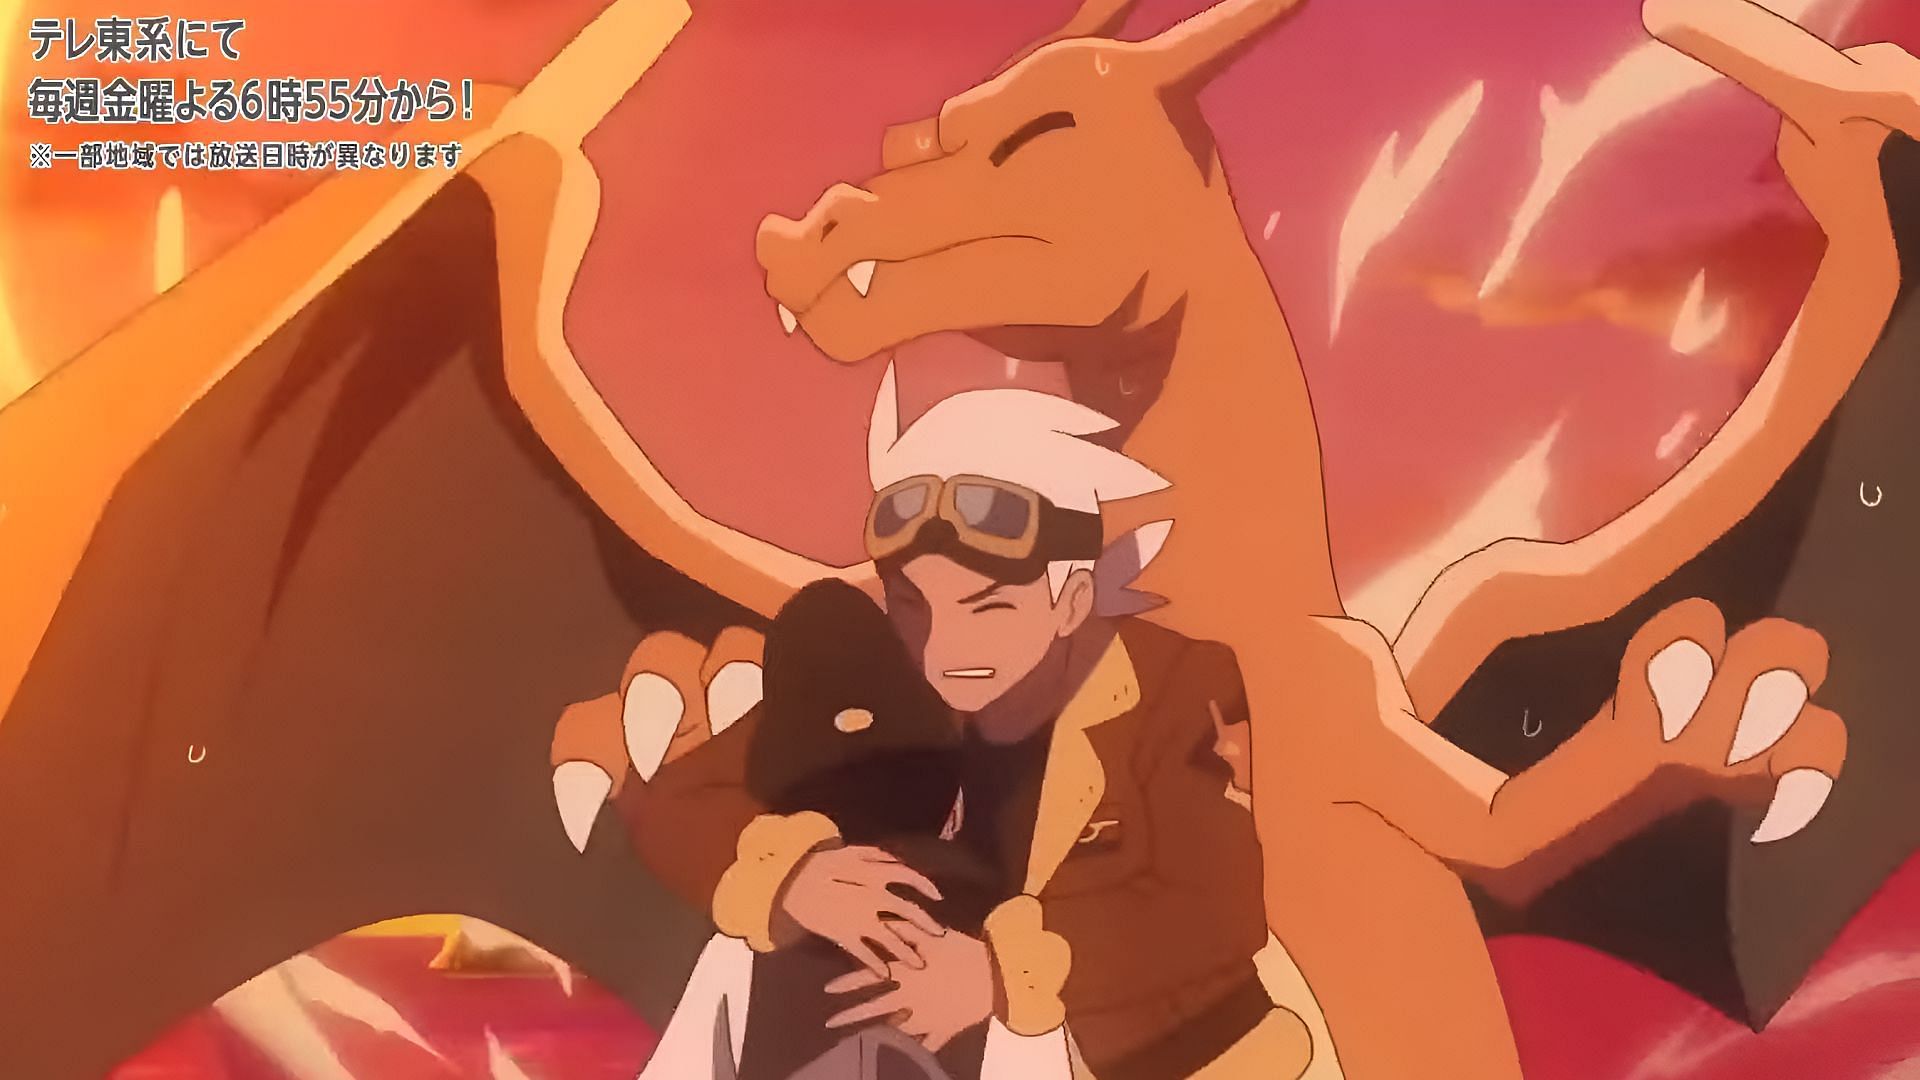 Charizard protects Friede and Roy in Pokemon Horizons Episode 33 (Image via The Pokemon Company)